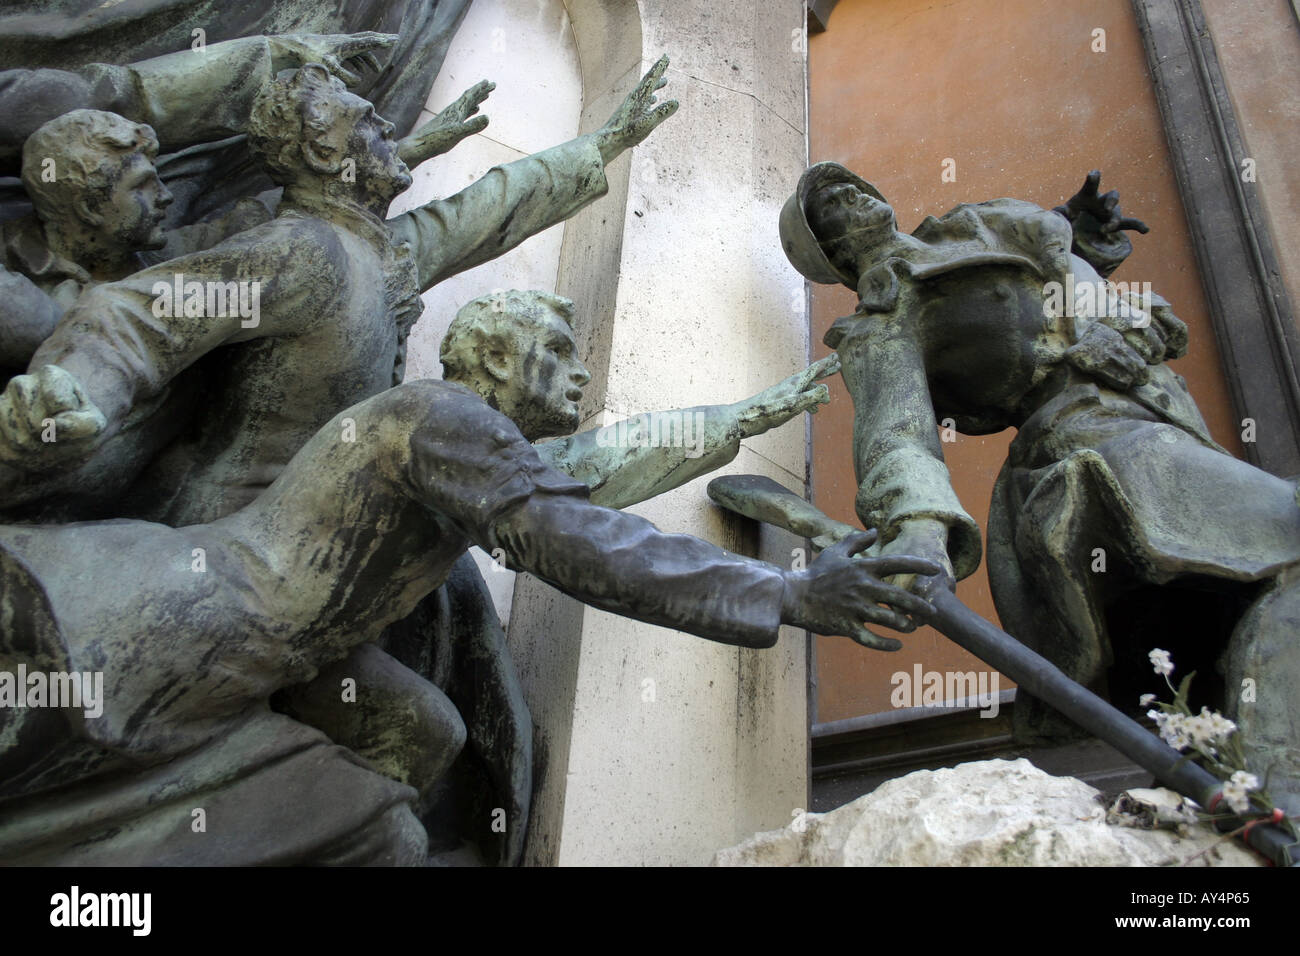 War and conflicts statue Budapest Stock Photo